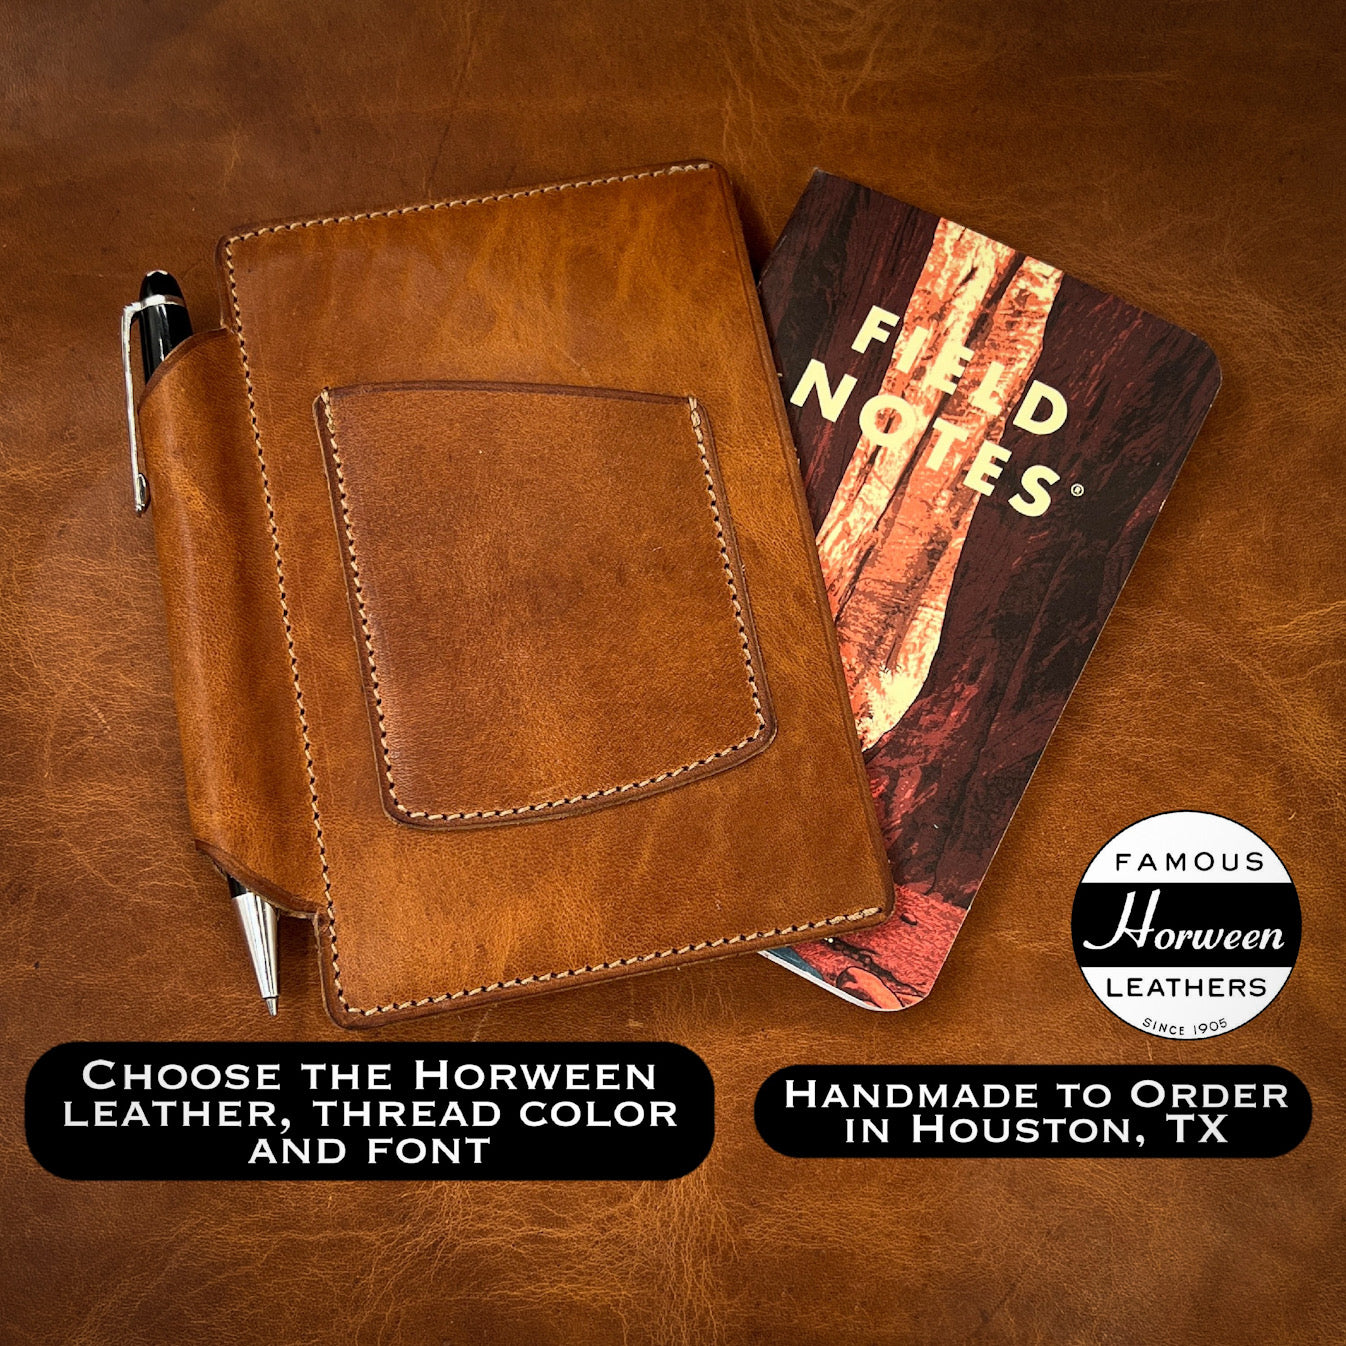 Passport / Field Notes Cover in Horween Leather | 3.5x5.5 format